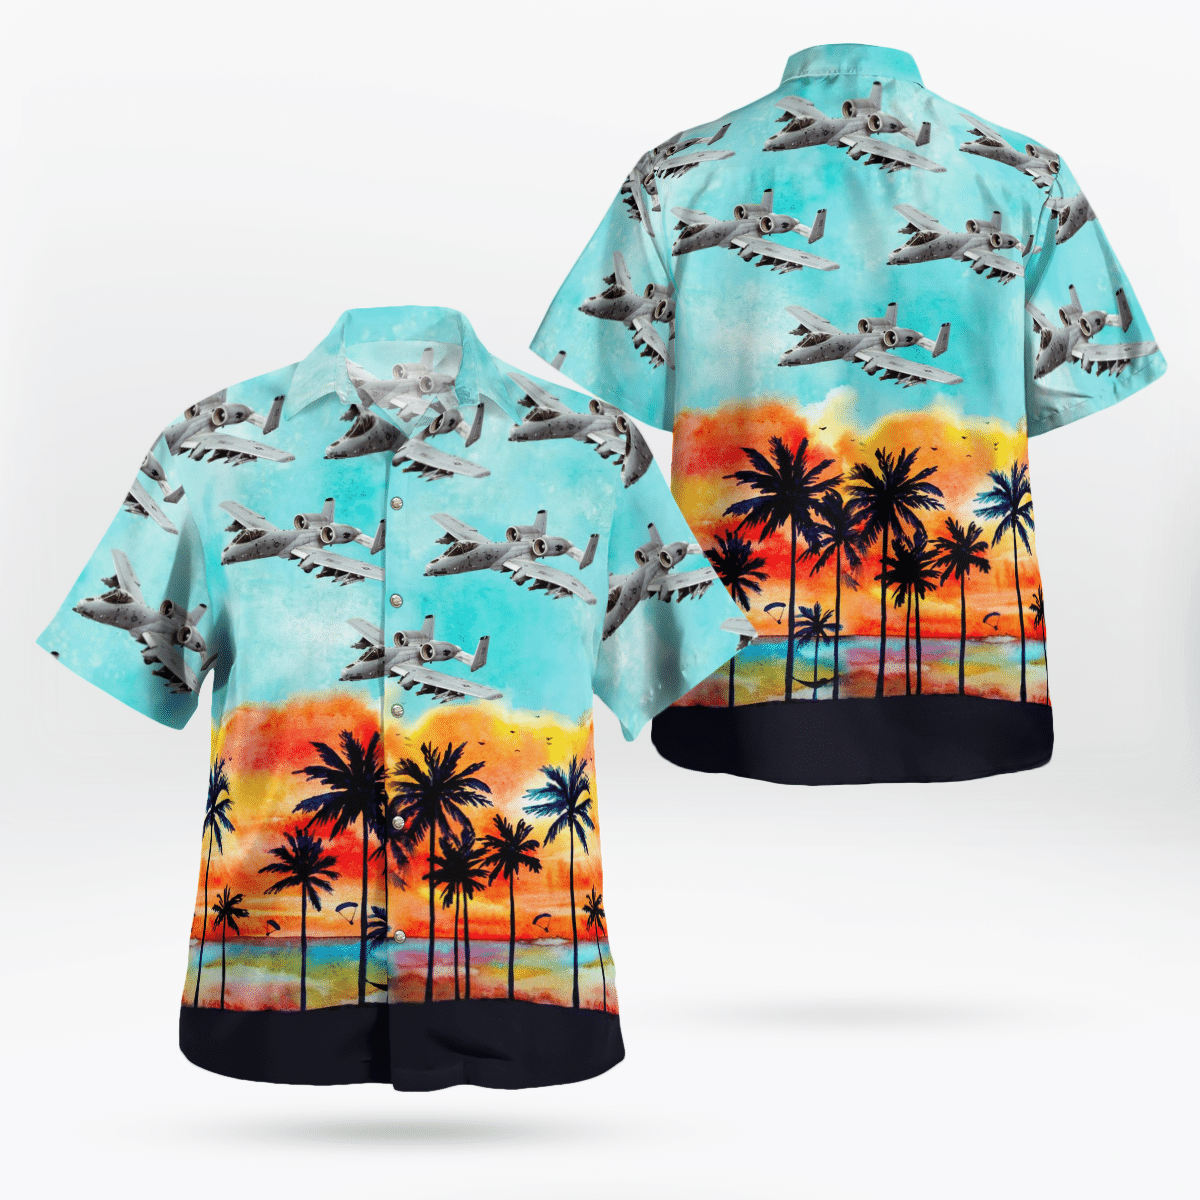 Consider getting these Hawaiian Shirt for your friends 91